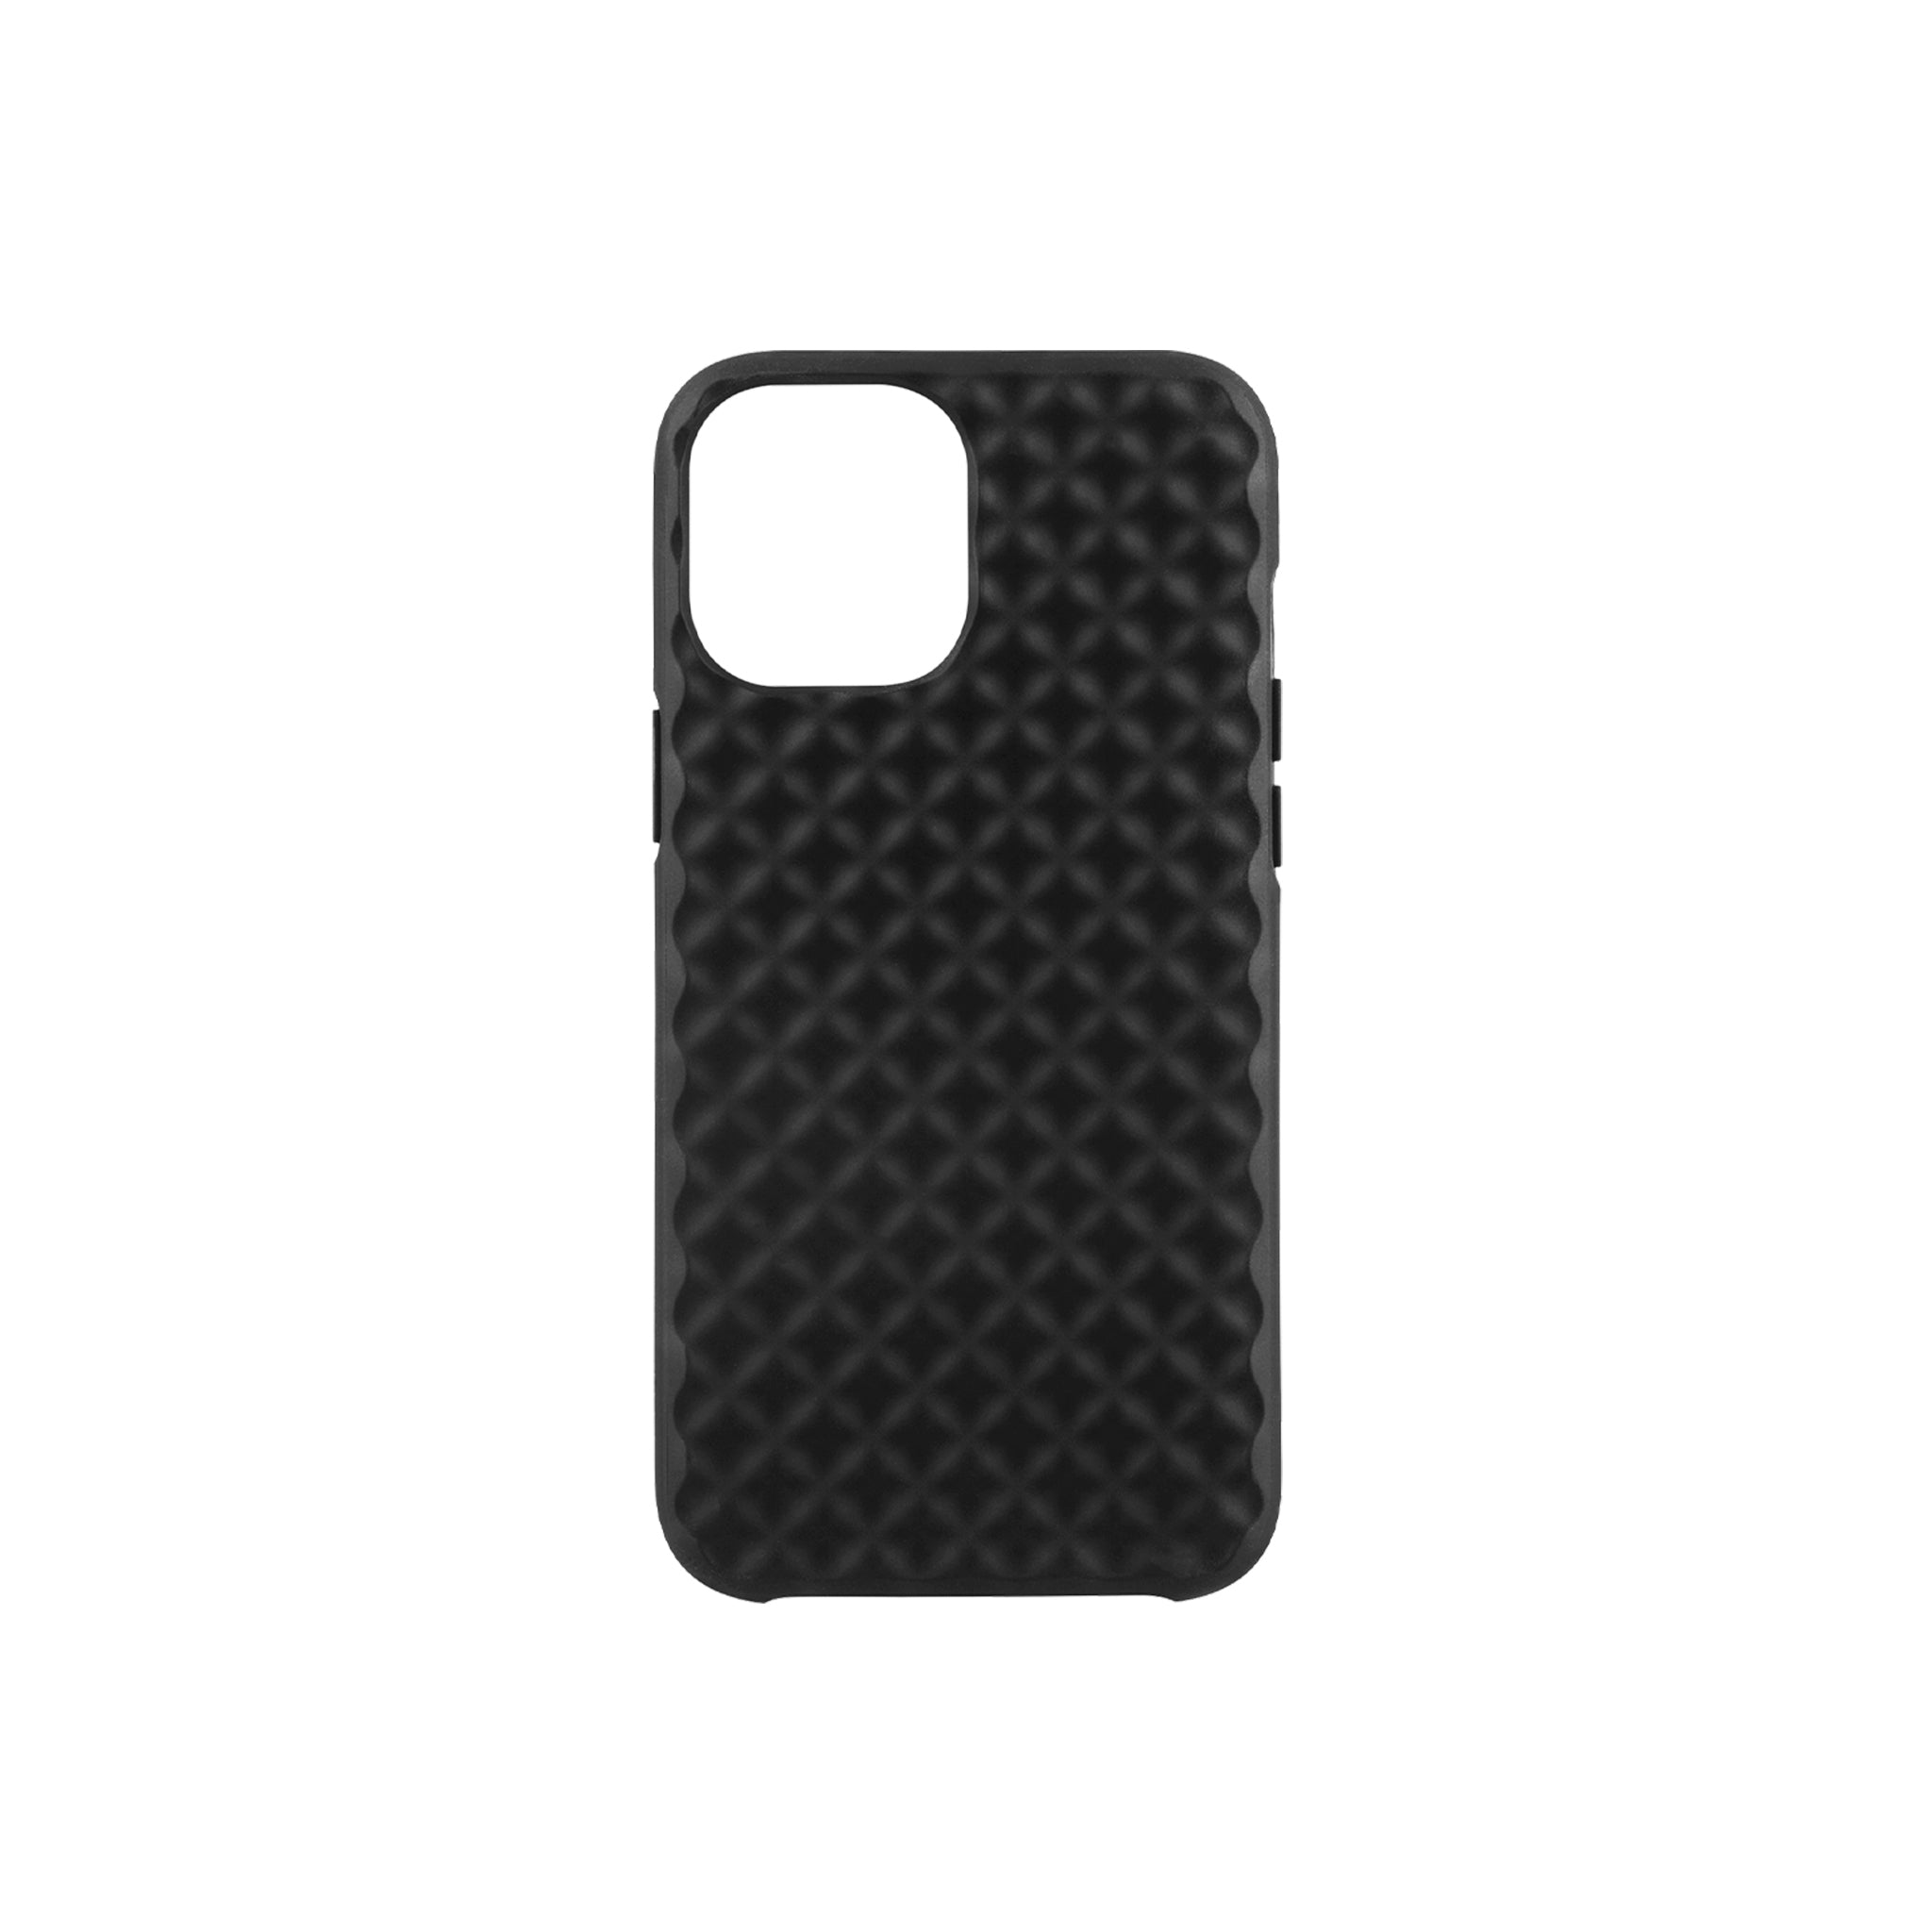 Pelican - Rogue Case For Apple Iphone 12 / 12 Pro - Black